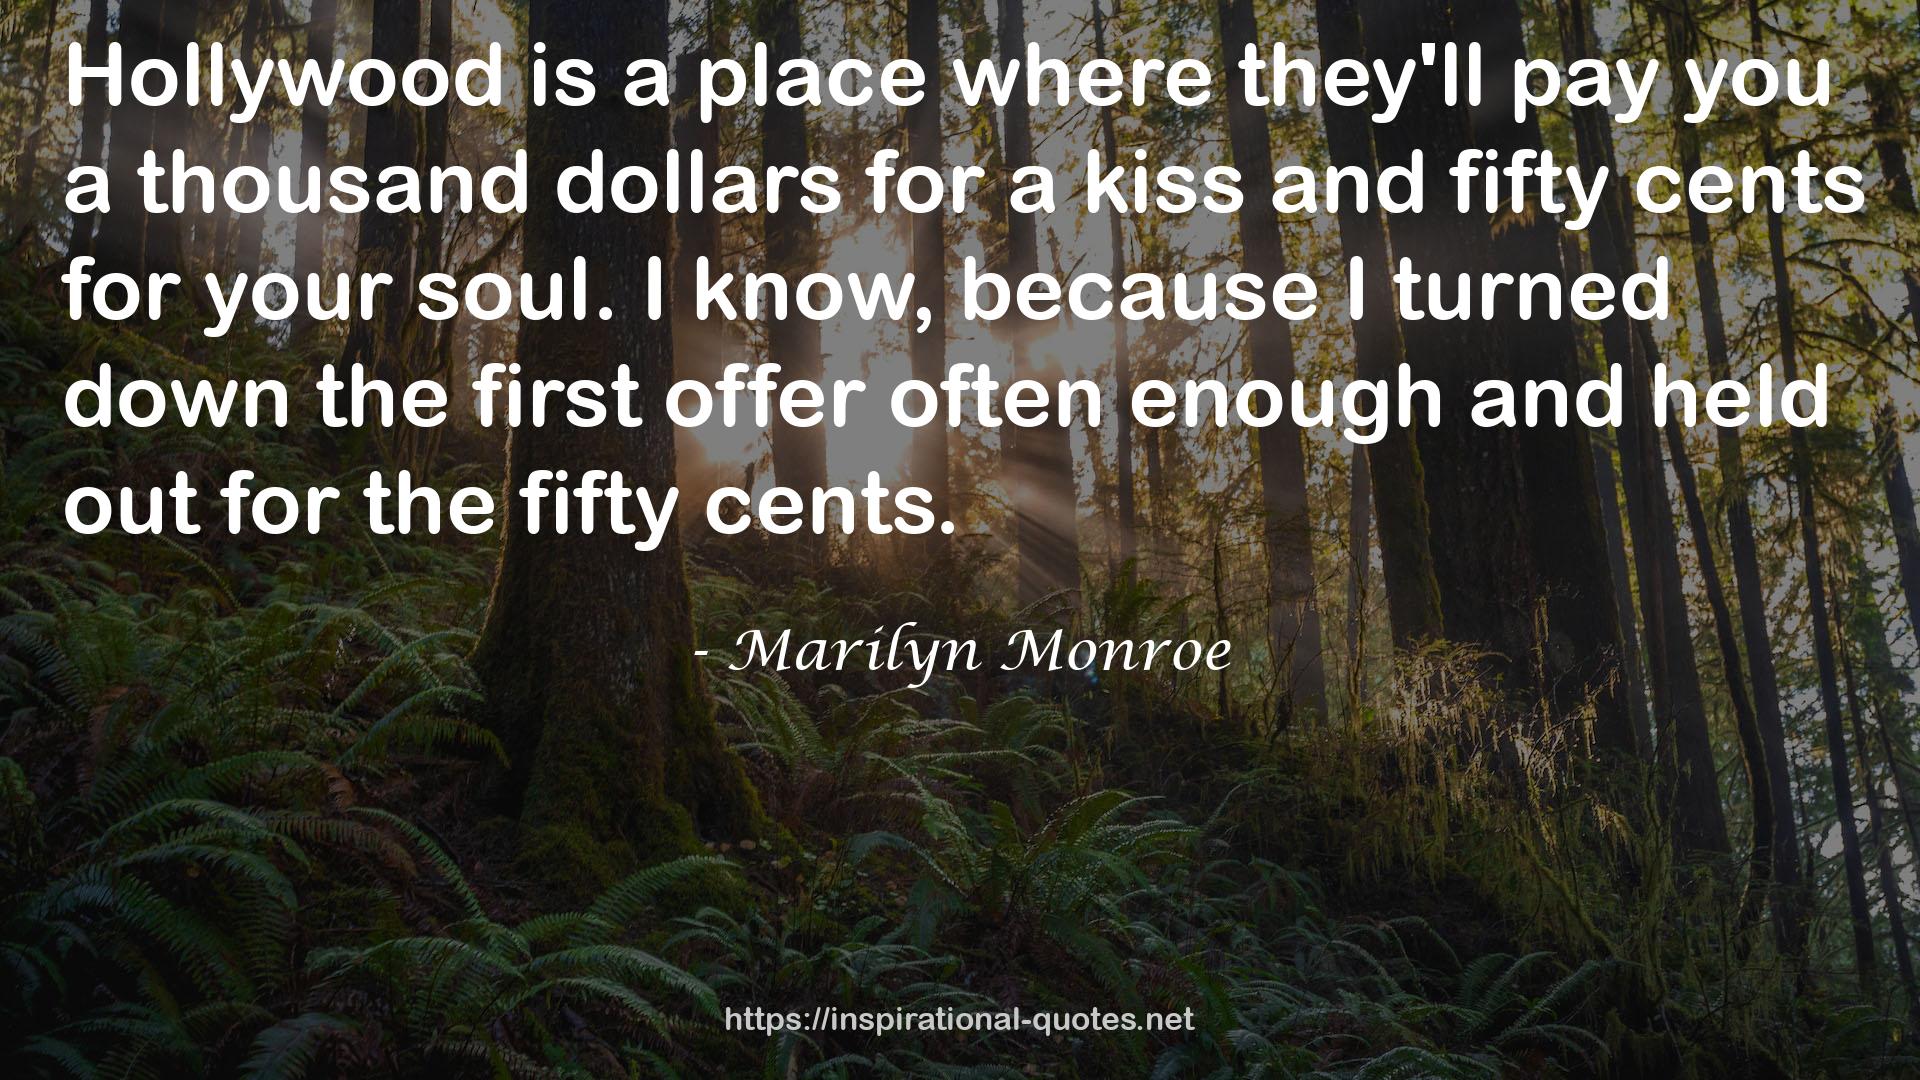 Marilyn Monroe QUOTES